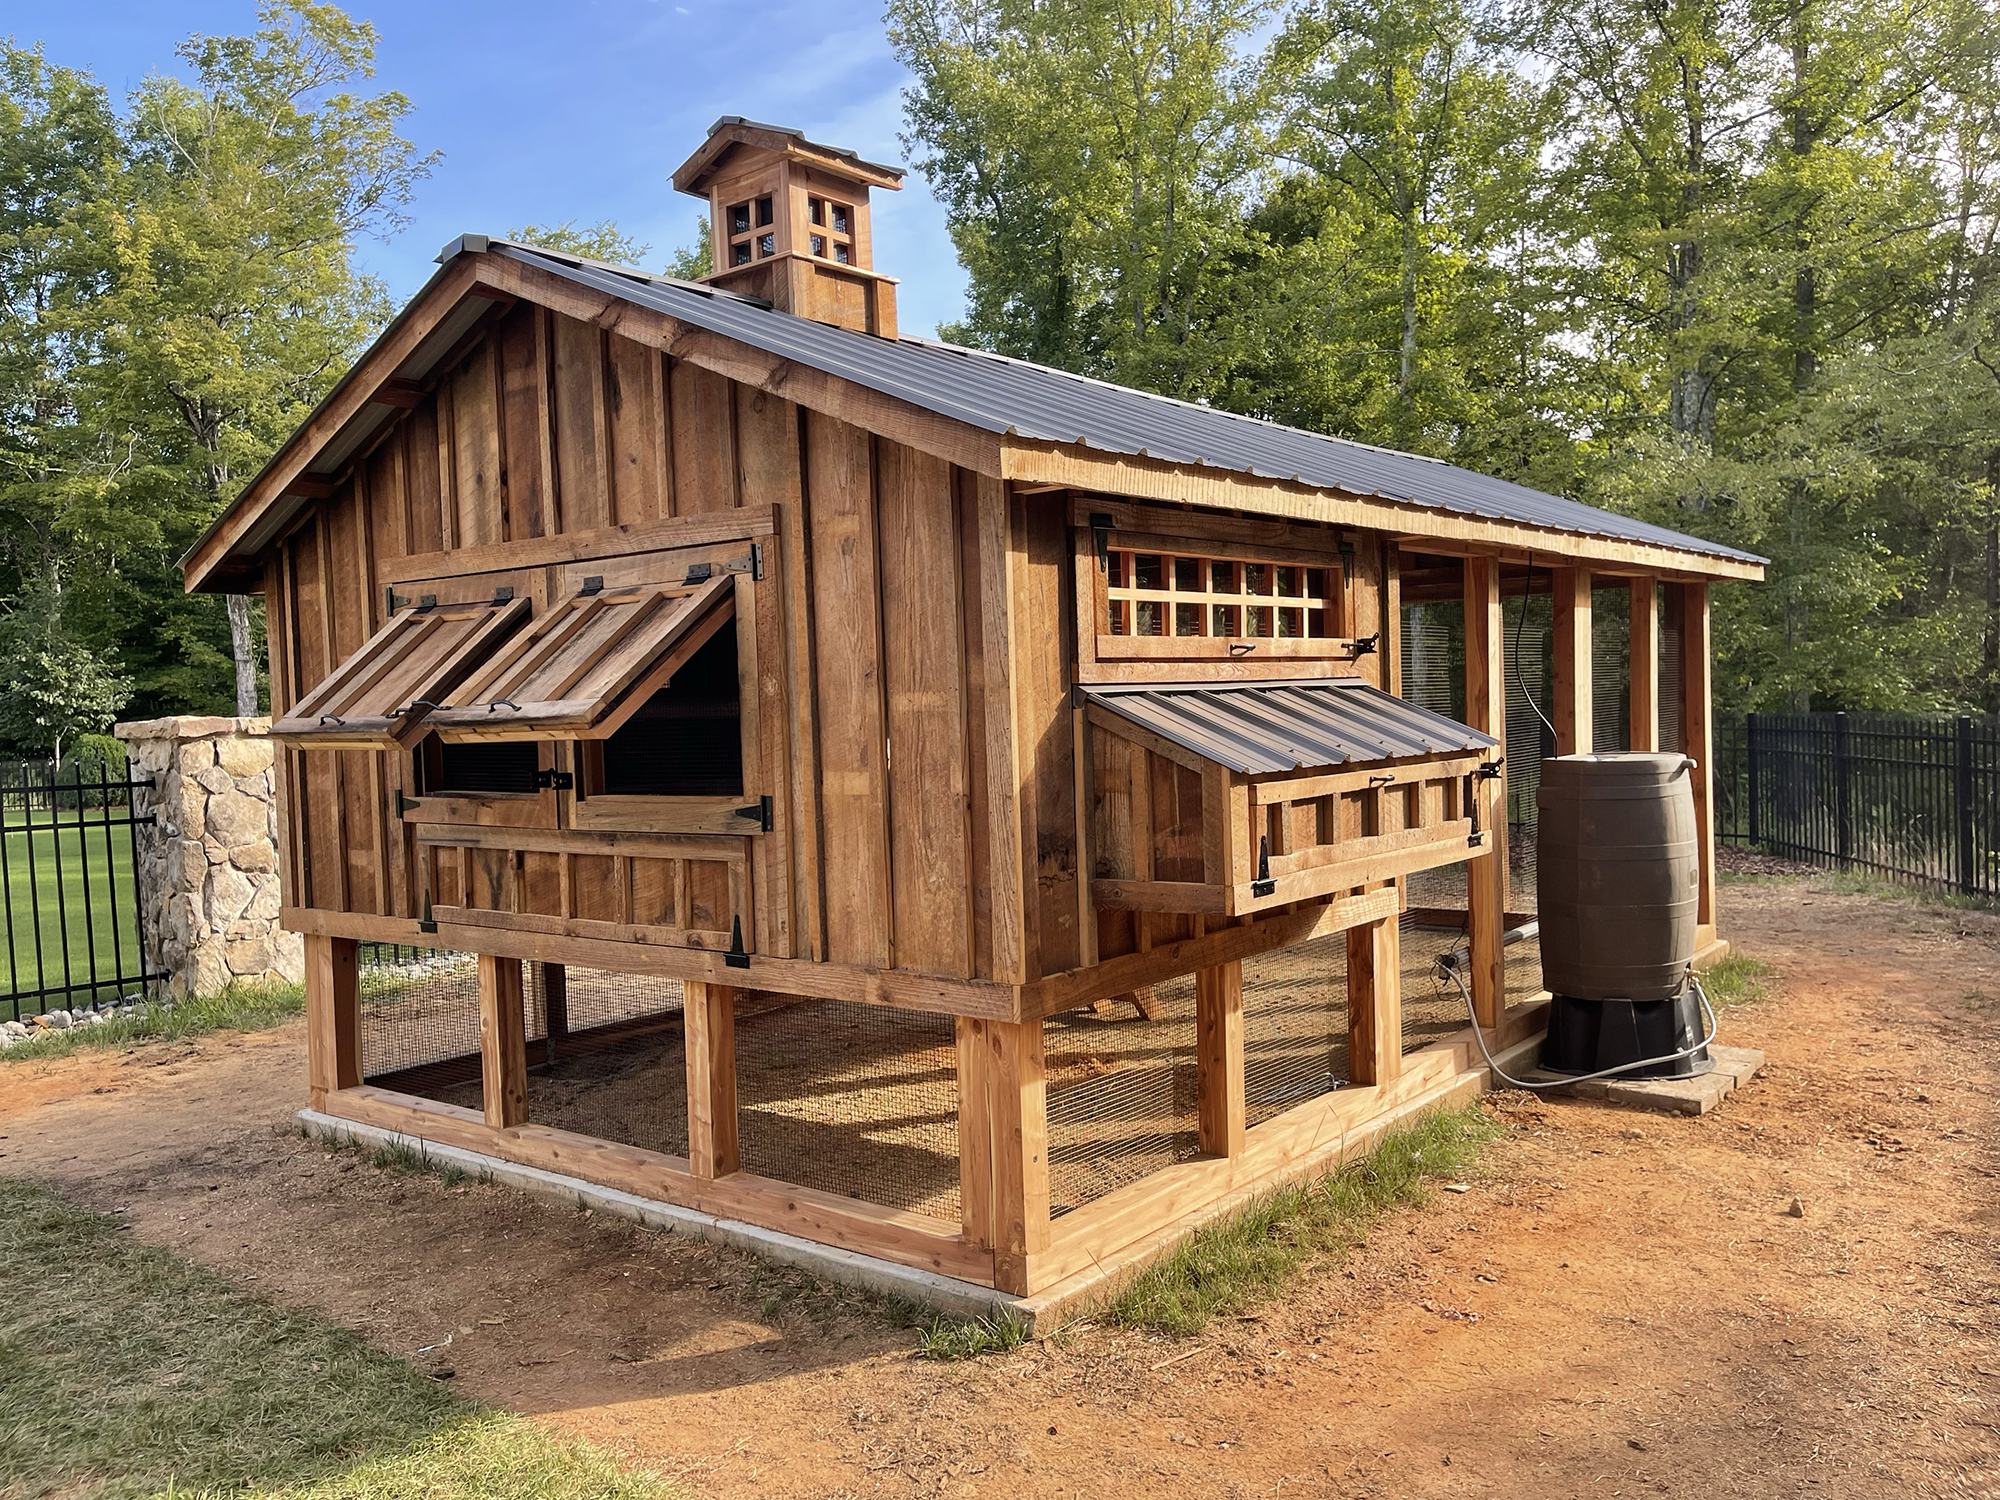 10x18 Carolina Coop with reclaimed barnwood siding in High Point, NC